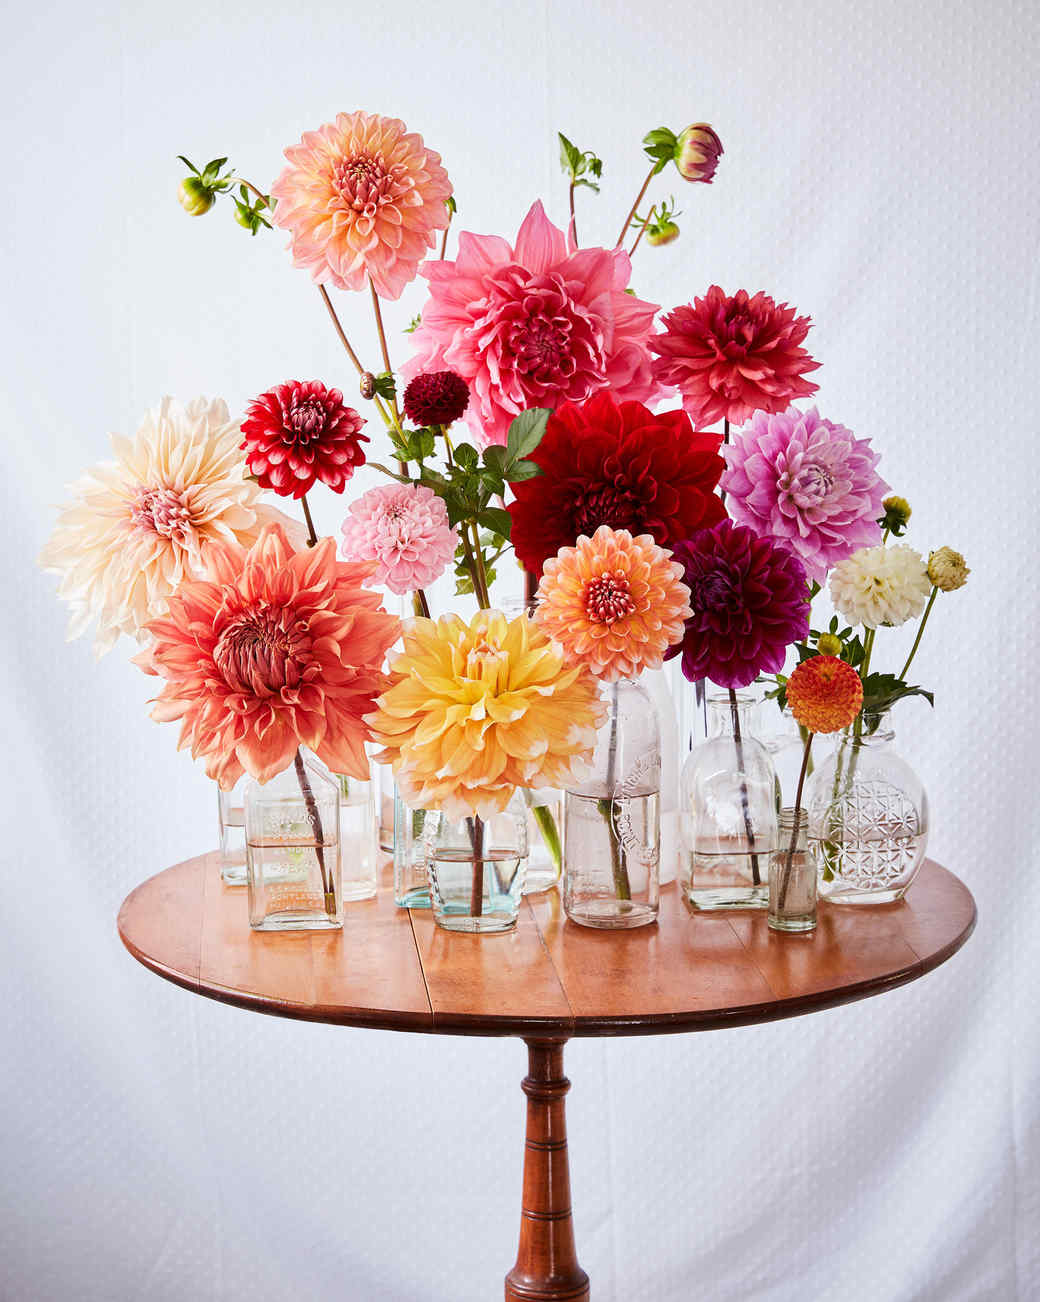 Flowers in vases on a table